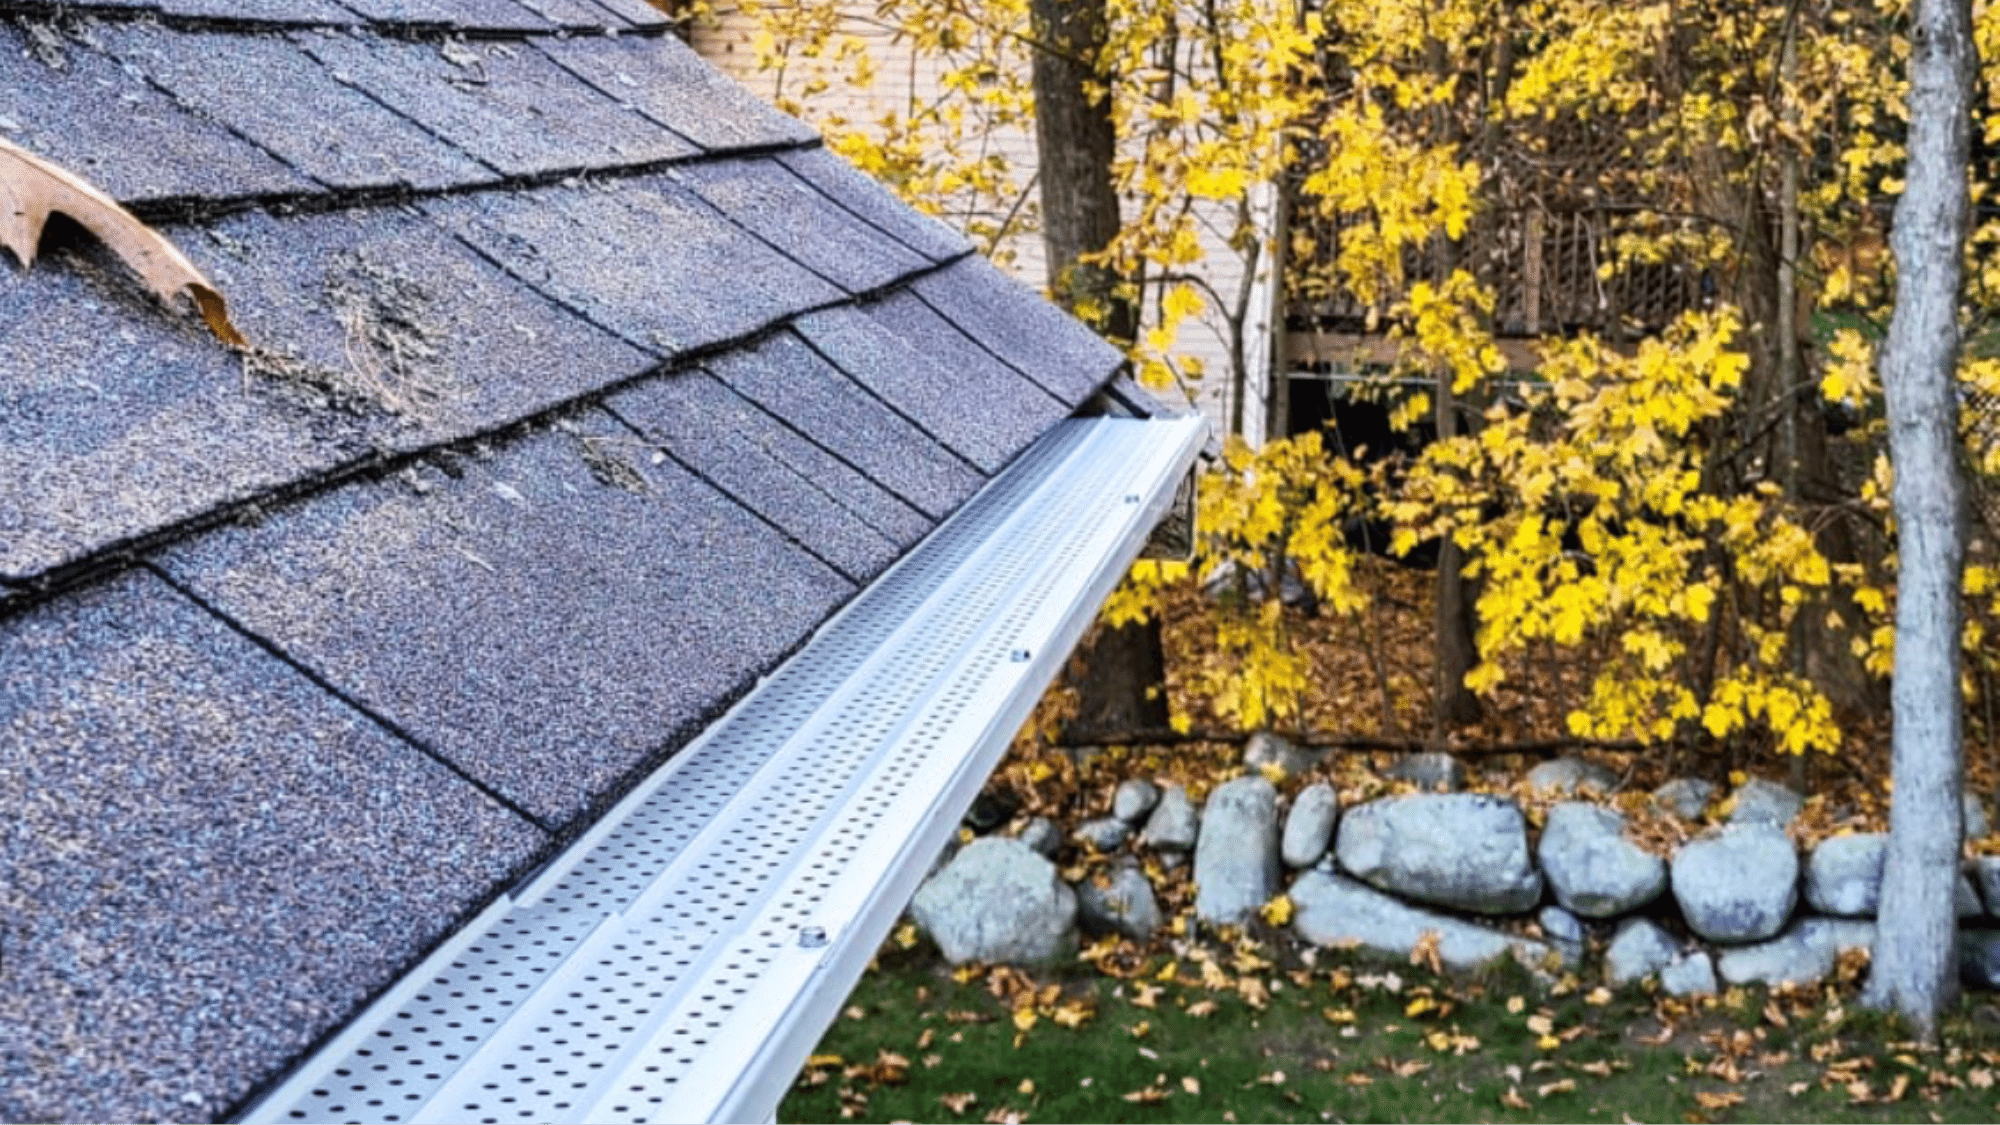 Strasburg Gutter Repair and Leaf Guard for Gutters